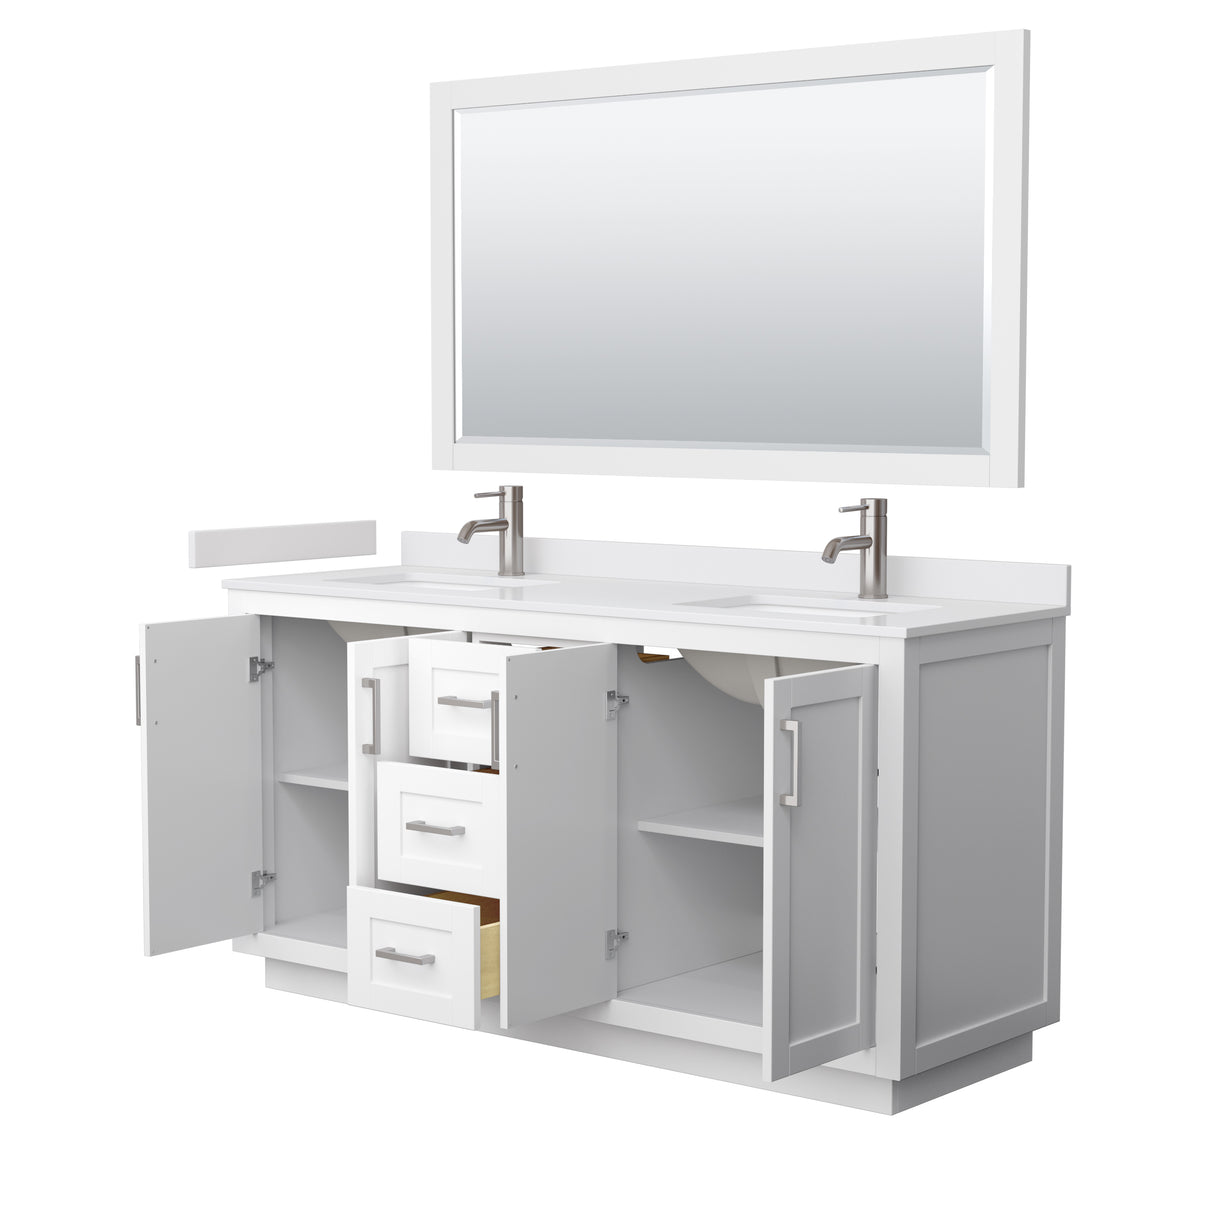 Miranda 66 Inch Double Bathroom Vanity in White White Cultured Marble Countertop Undermount Square Sinks Brushed Nickel Trim 58 Inch Mirror